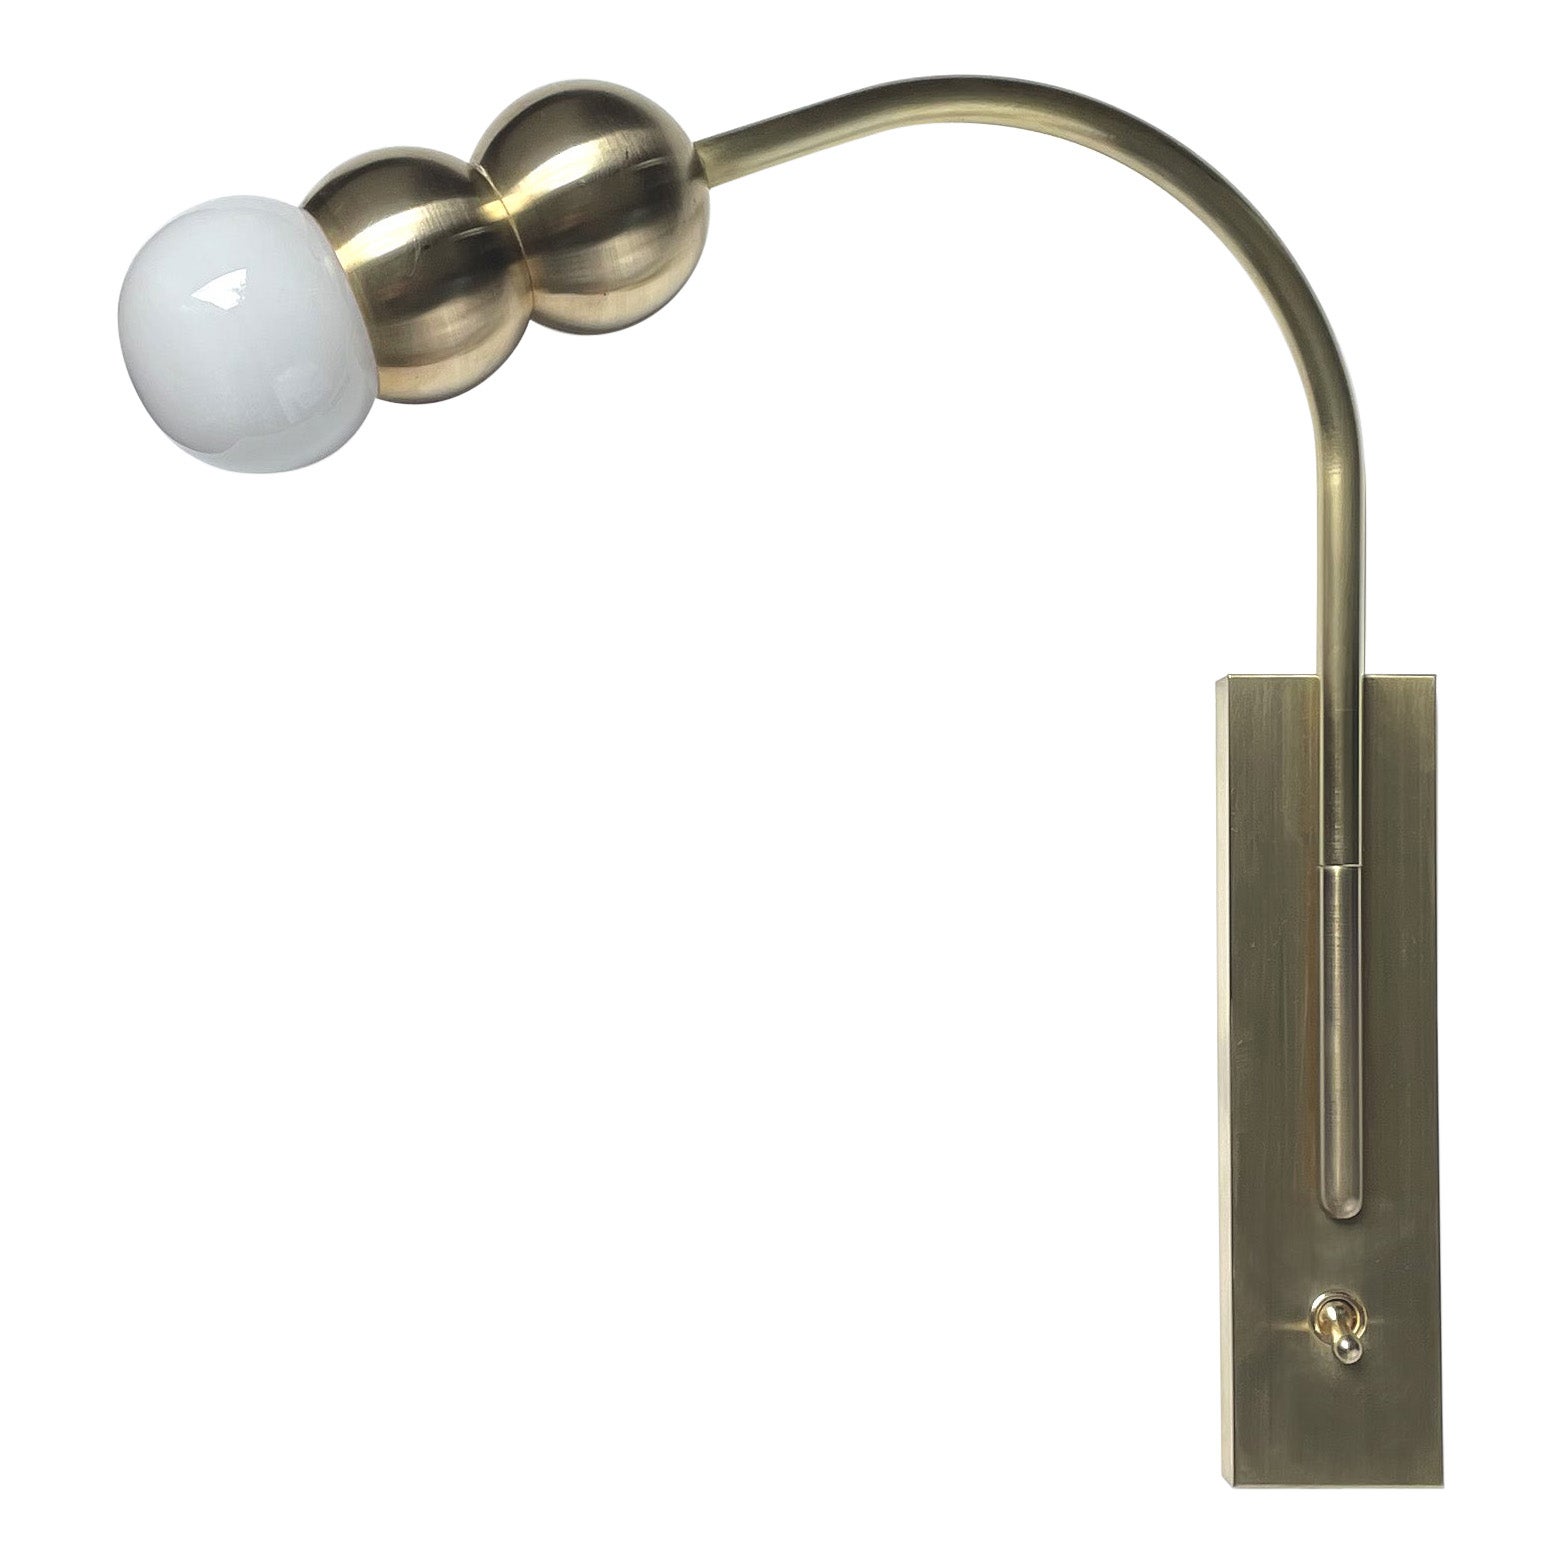 Orion bed lamp by Emilie Lemardeley, 21st century, brass & hand blown glass